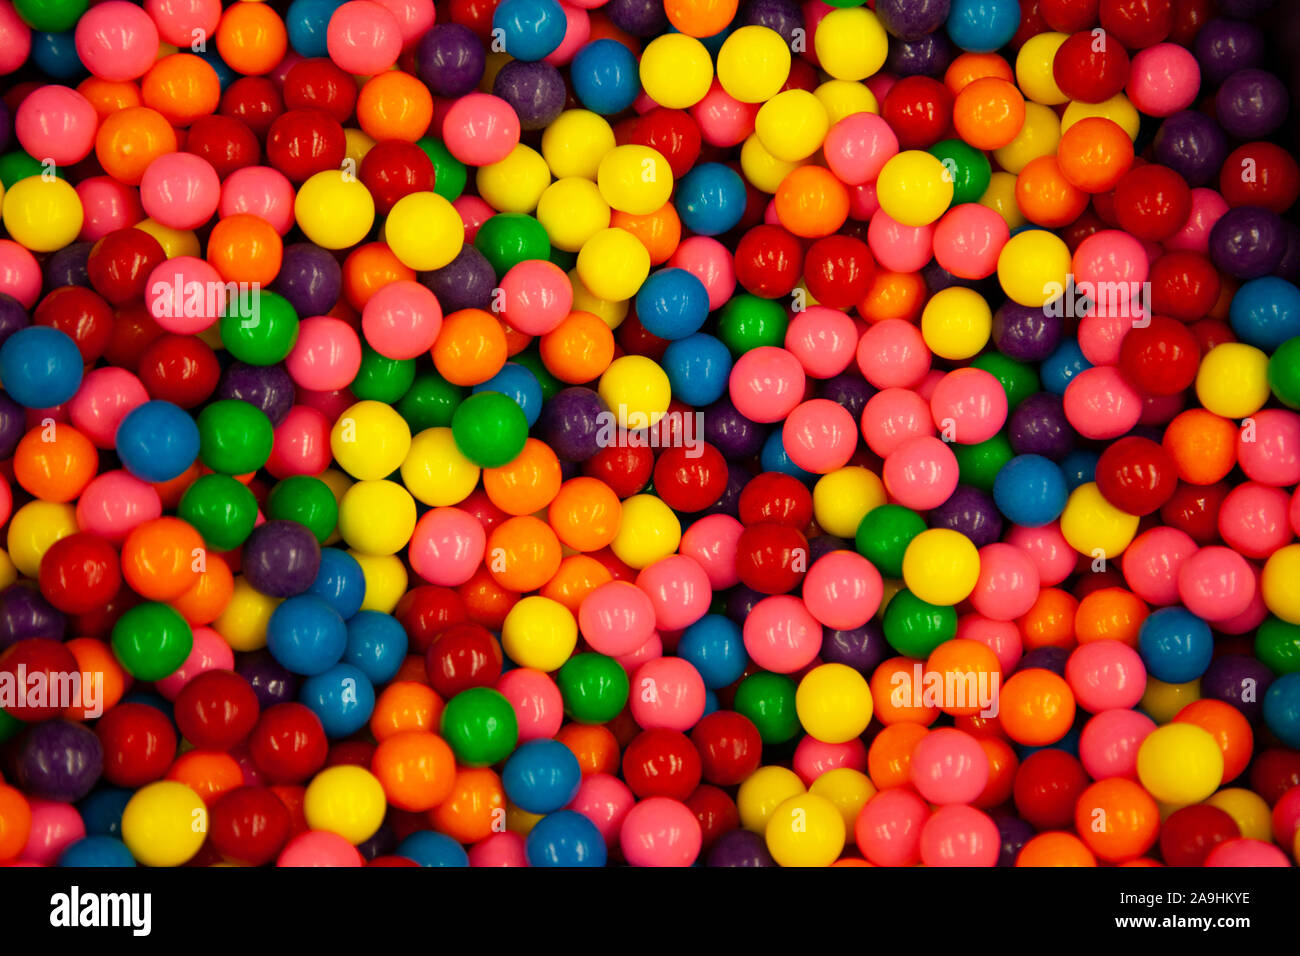 hard candy junk food in colorful sugar coated gum ball form Stock Photo